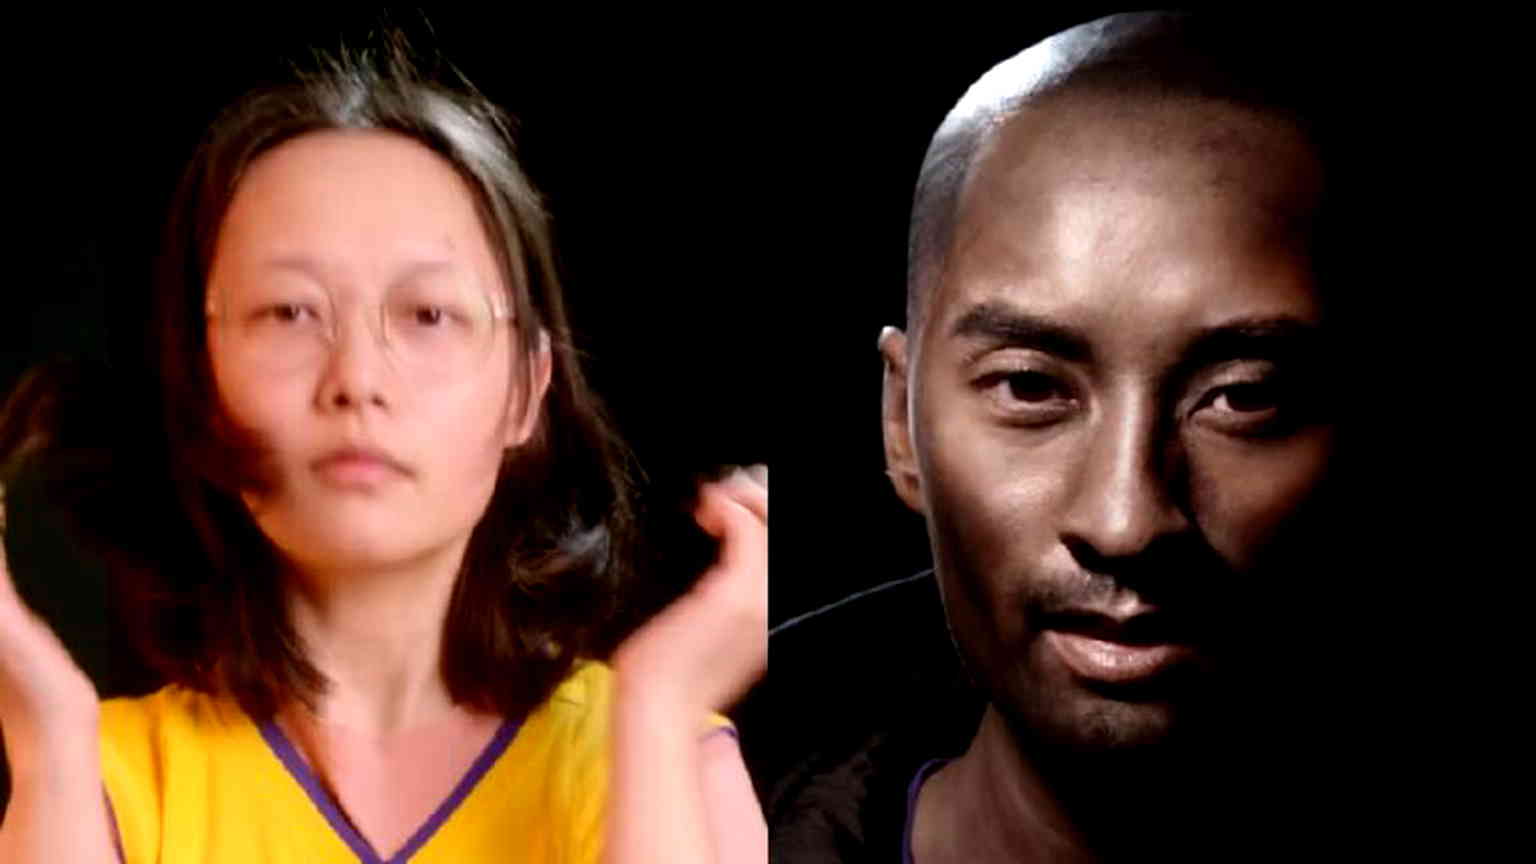 Chinese makeup artist accused of ‘blackface’ after Kobe Bryant tribute resurfaces